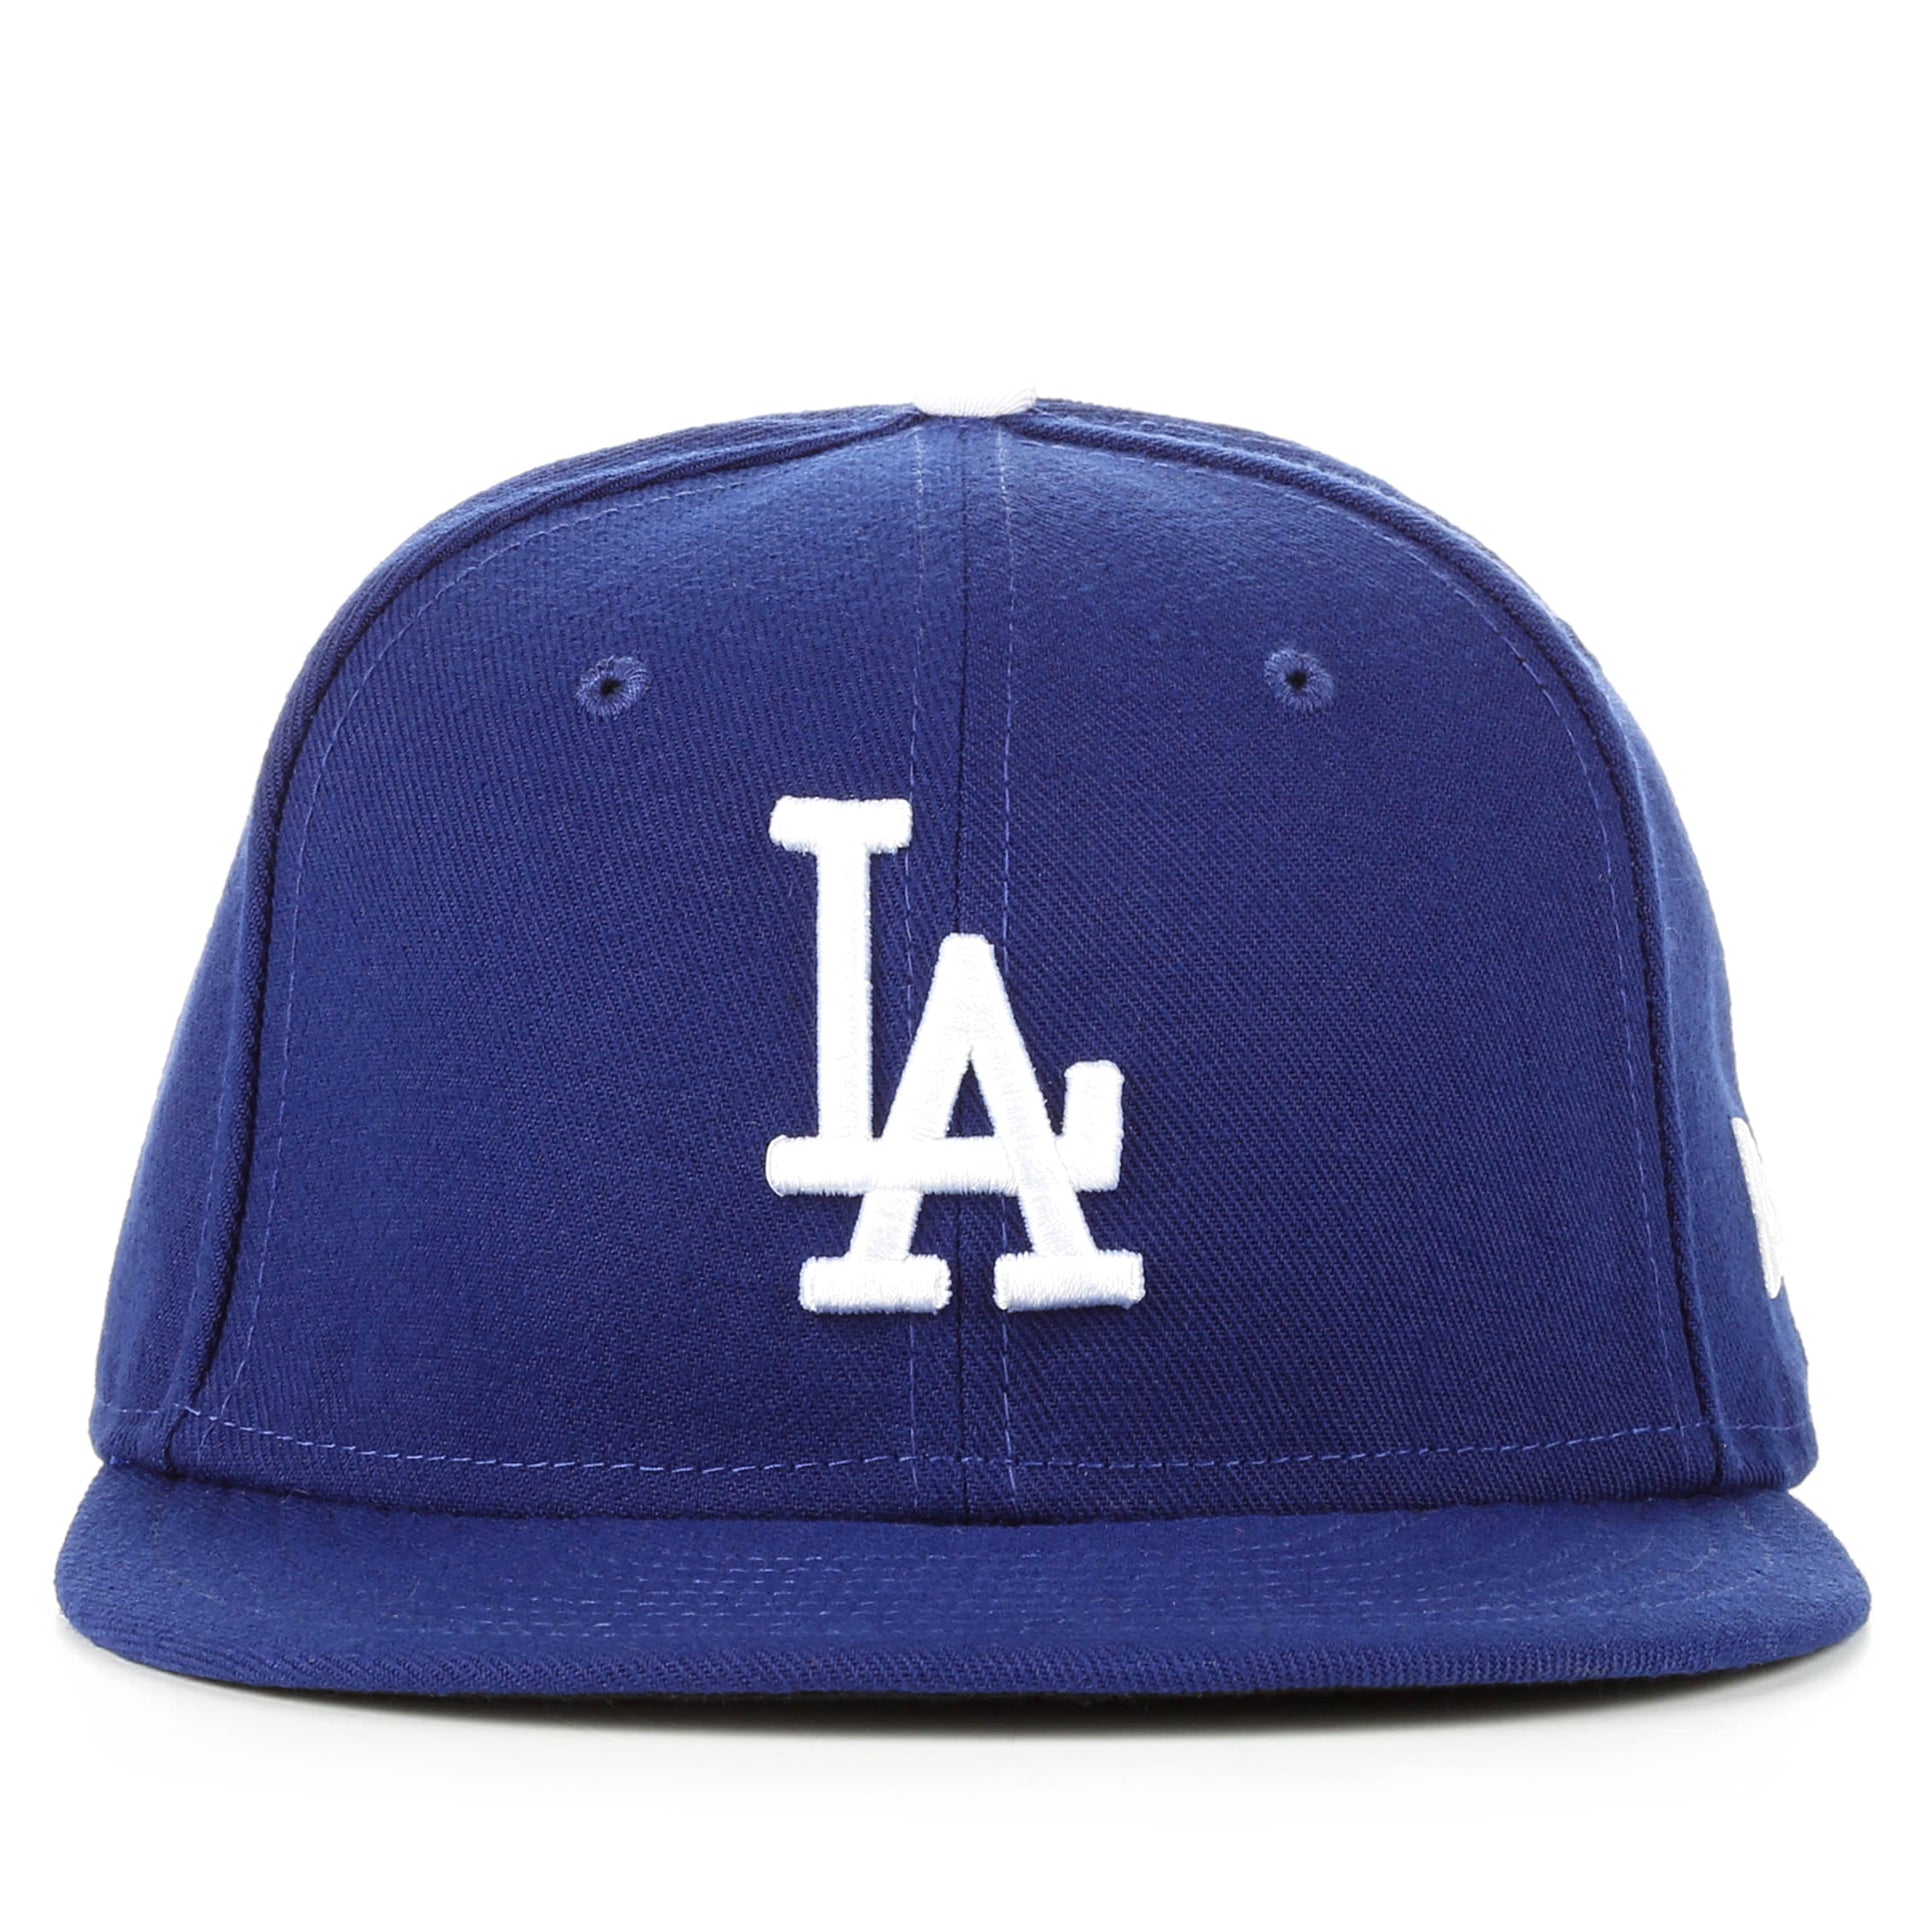 New Era 59Fifty AC Performance Fitted Cap - Los Angeles Dodgers/Blue - New  Star